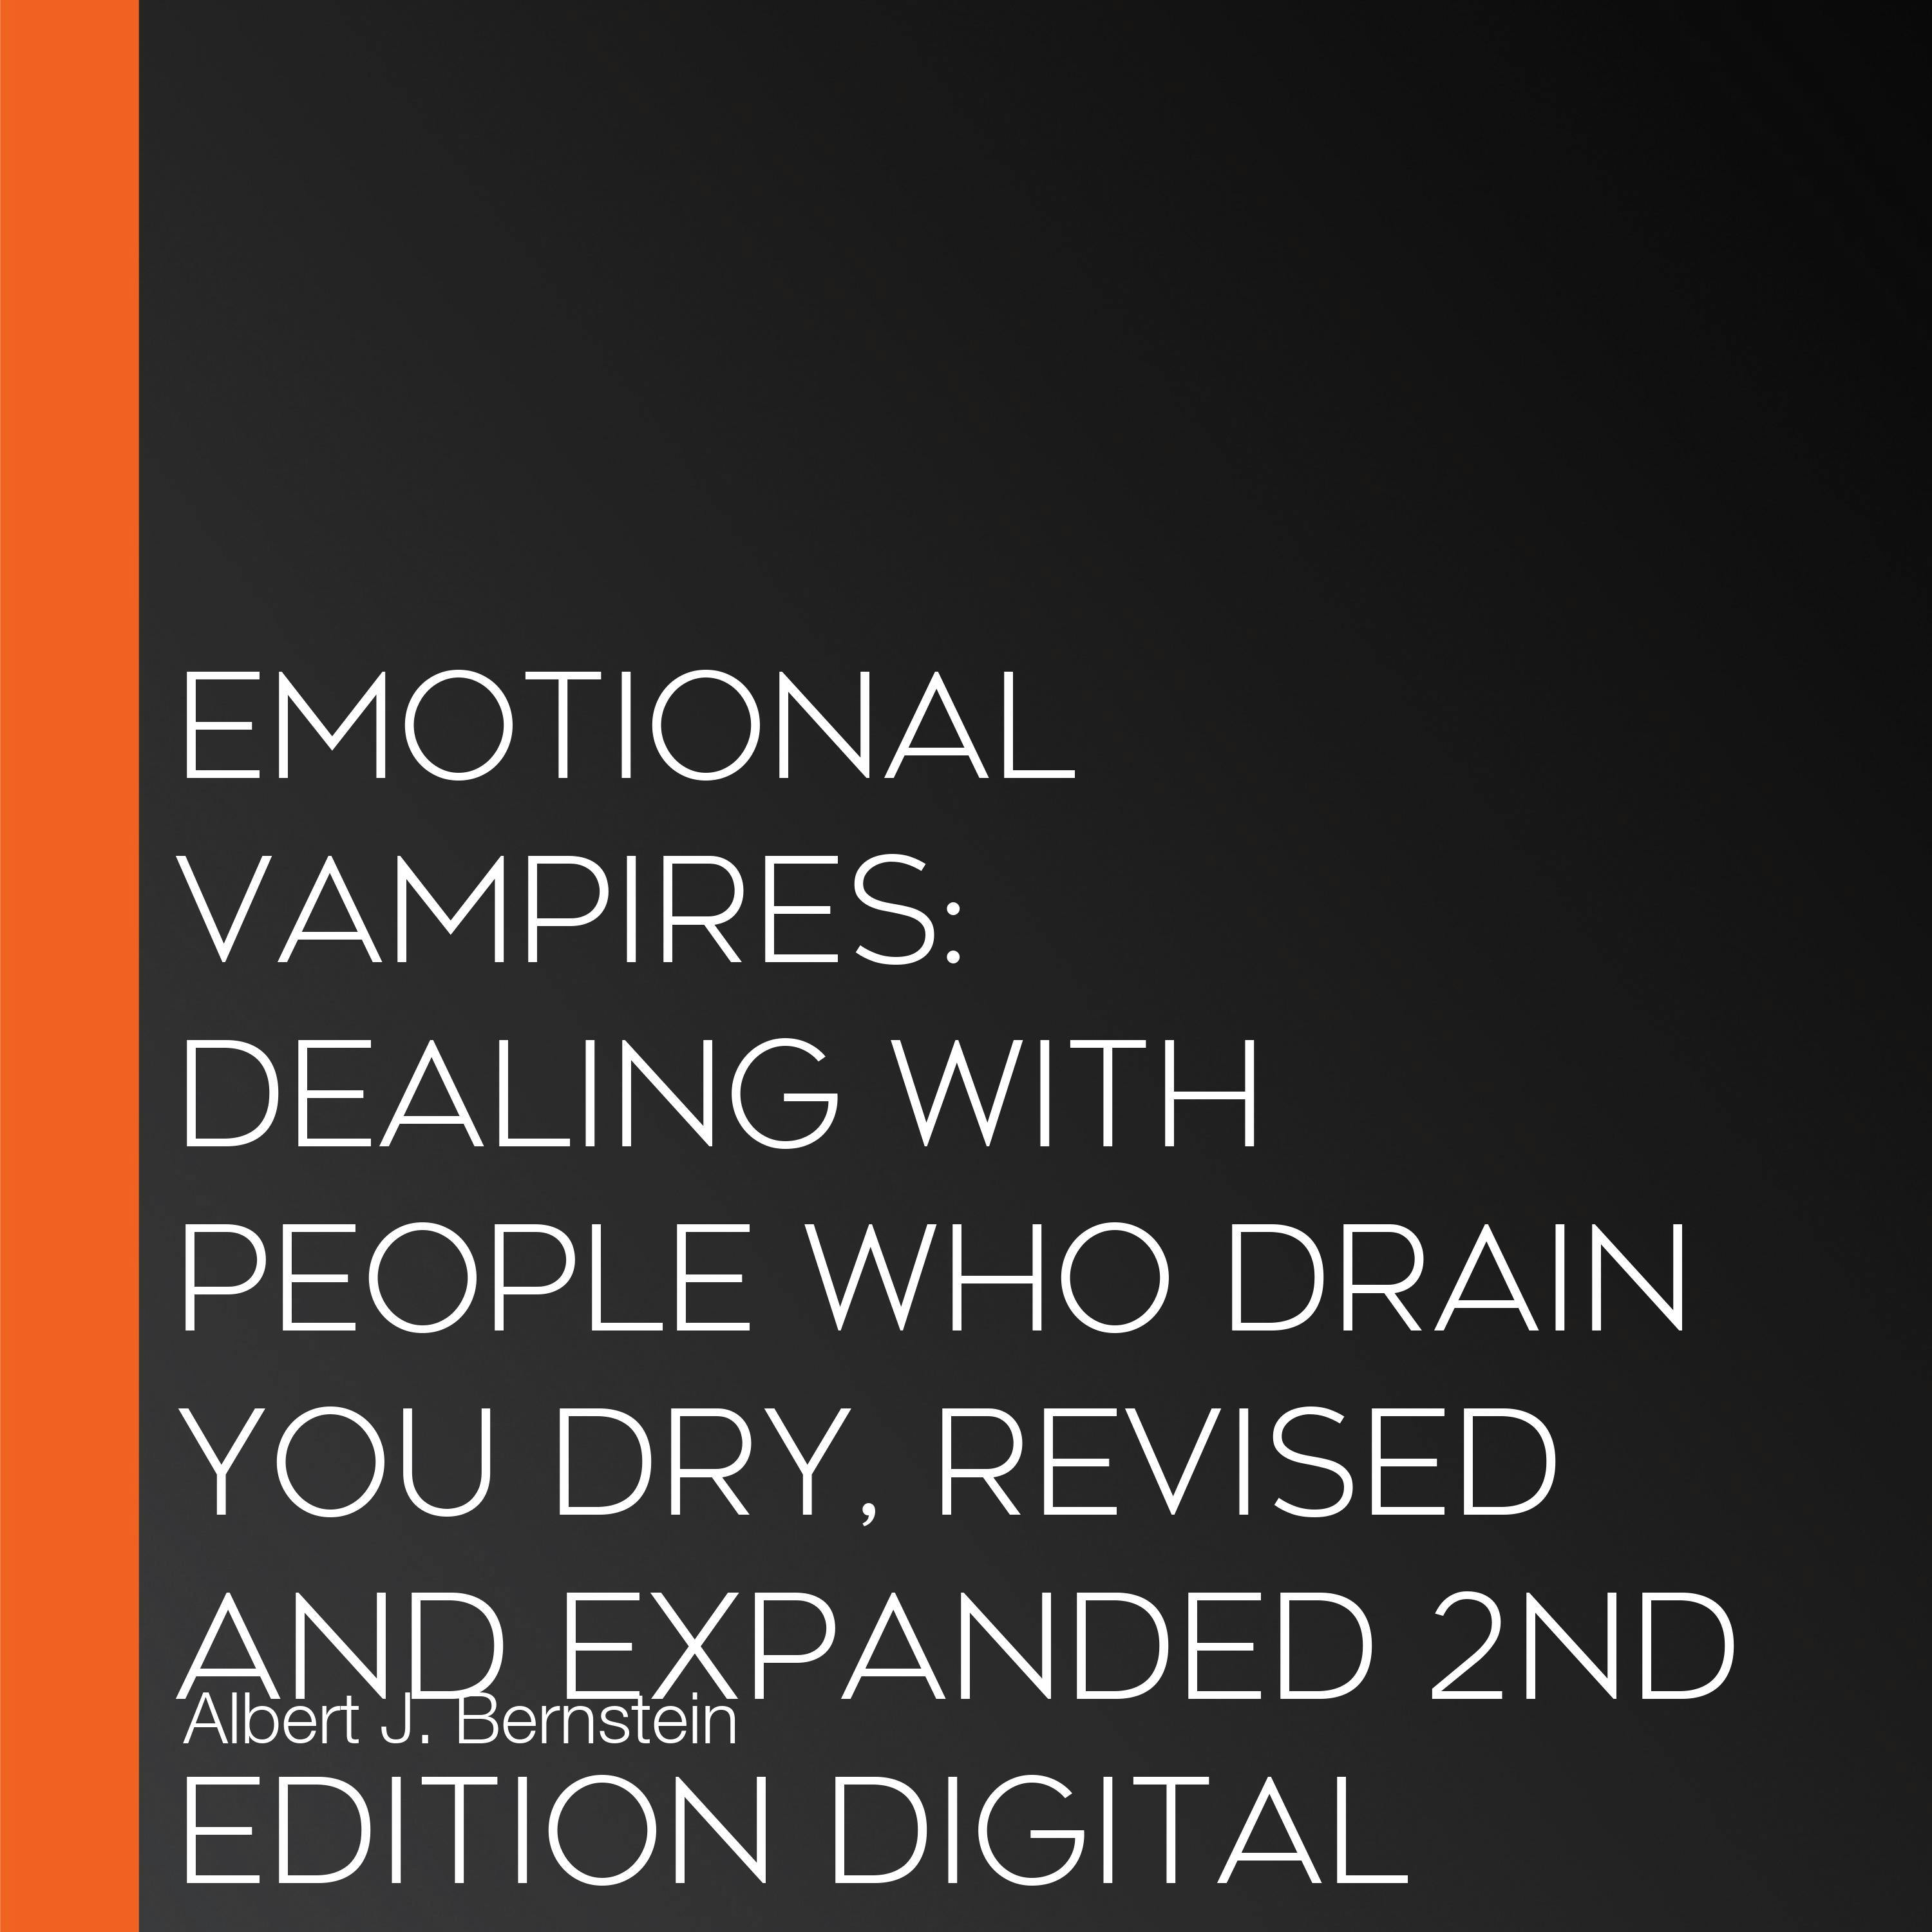 Emotional Vampires: Dealing with People Who Drain You Dry, Revised and Expanded 2nd Edition DIGITAL AUDIO - Albert J. Bernstein